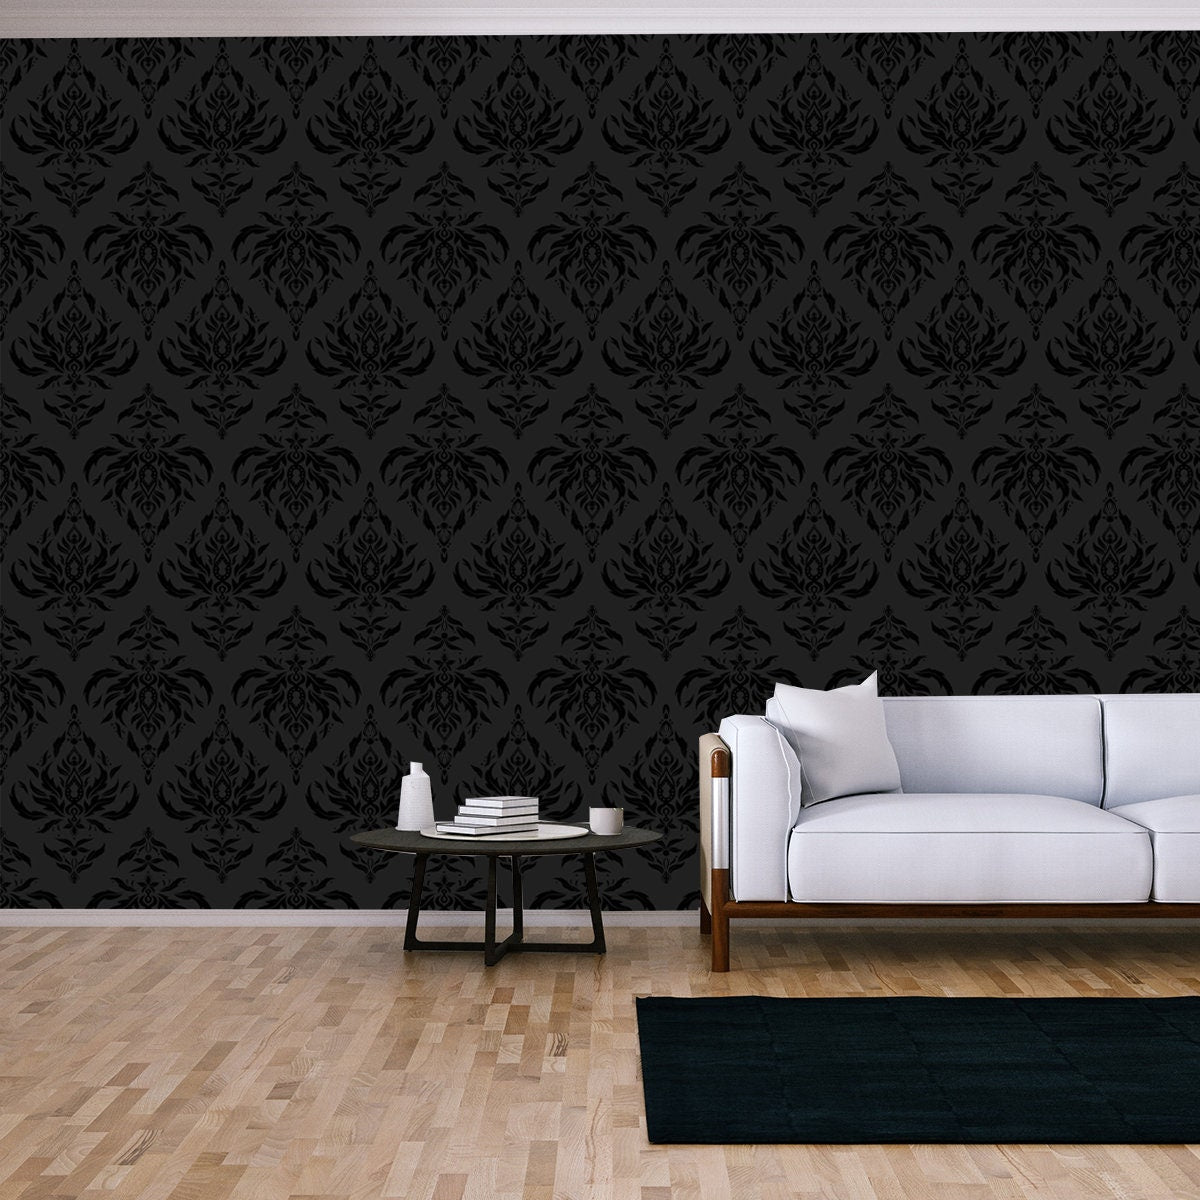 Lace Texture, Raster Tulle Background, Swirly Seamless Pattern in Gray and Black Colors Wallpaper Living Room Mural